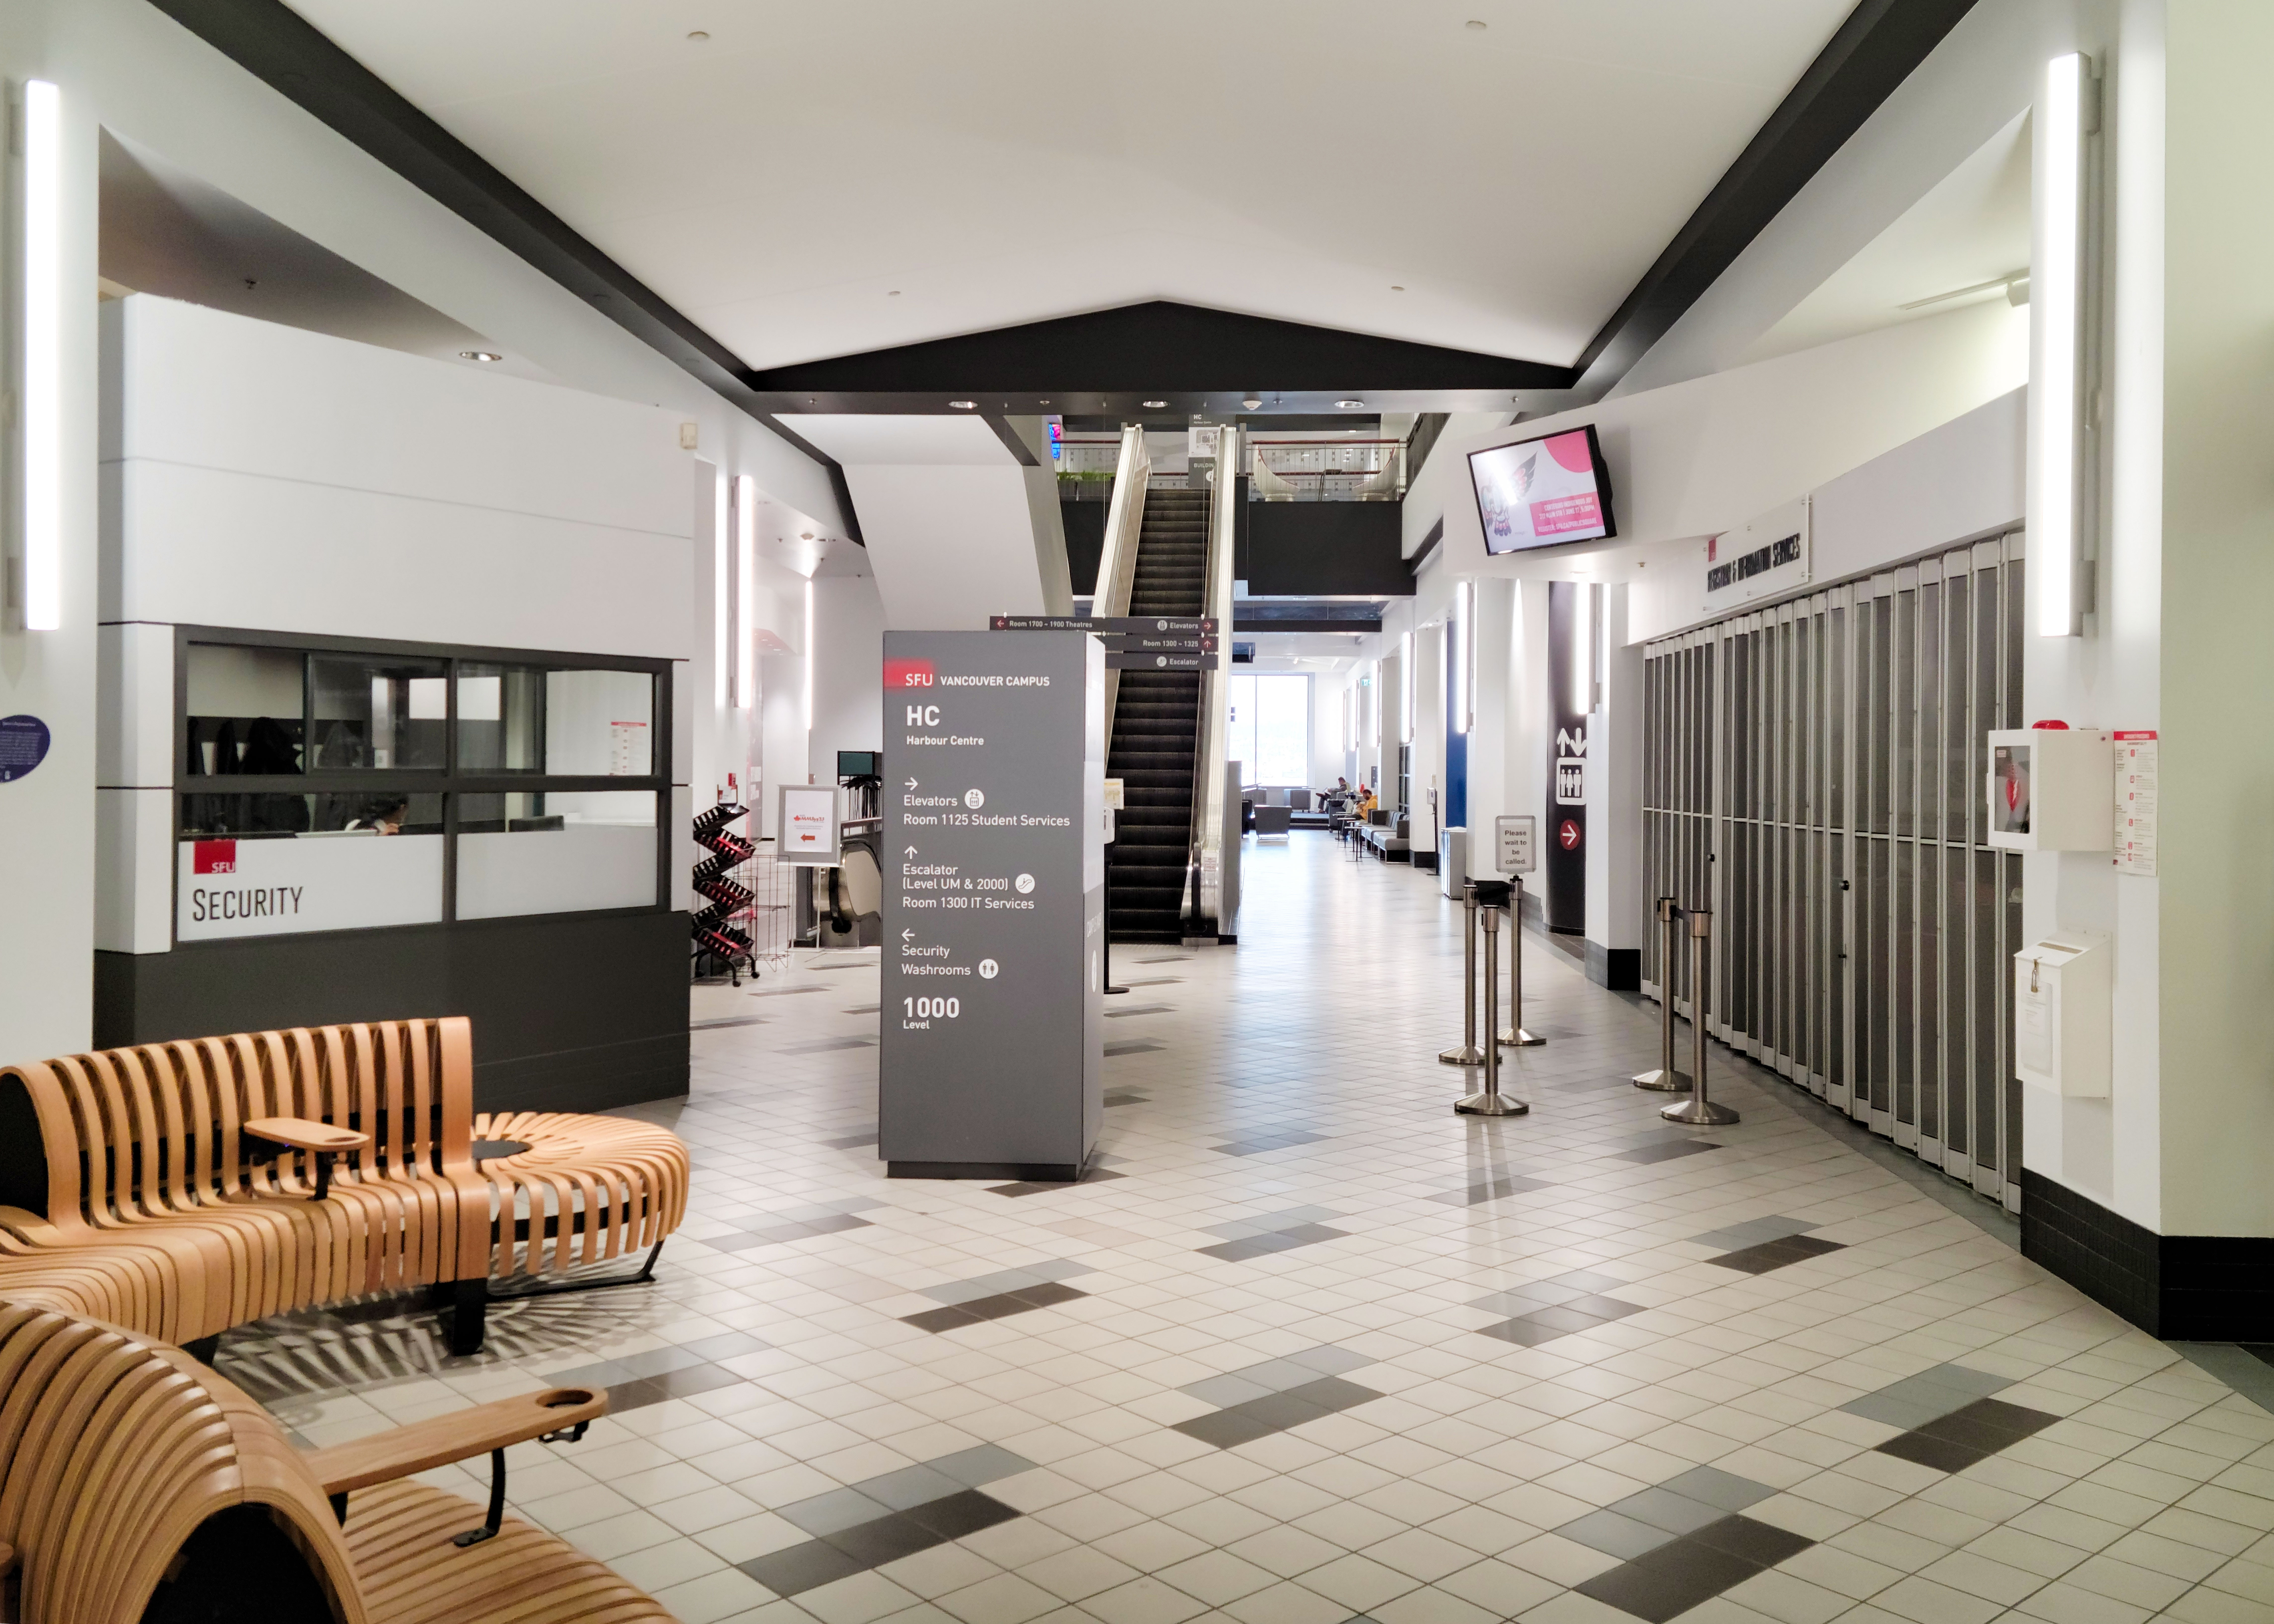 This is a photo of the SFU Vancouver campus. The lobby contains the security booth, seating for students to study, escalators, and a location directory.